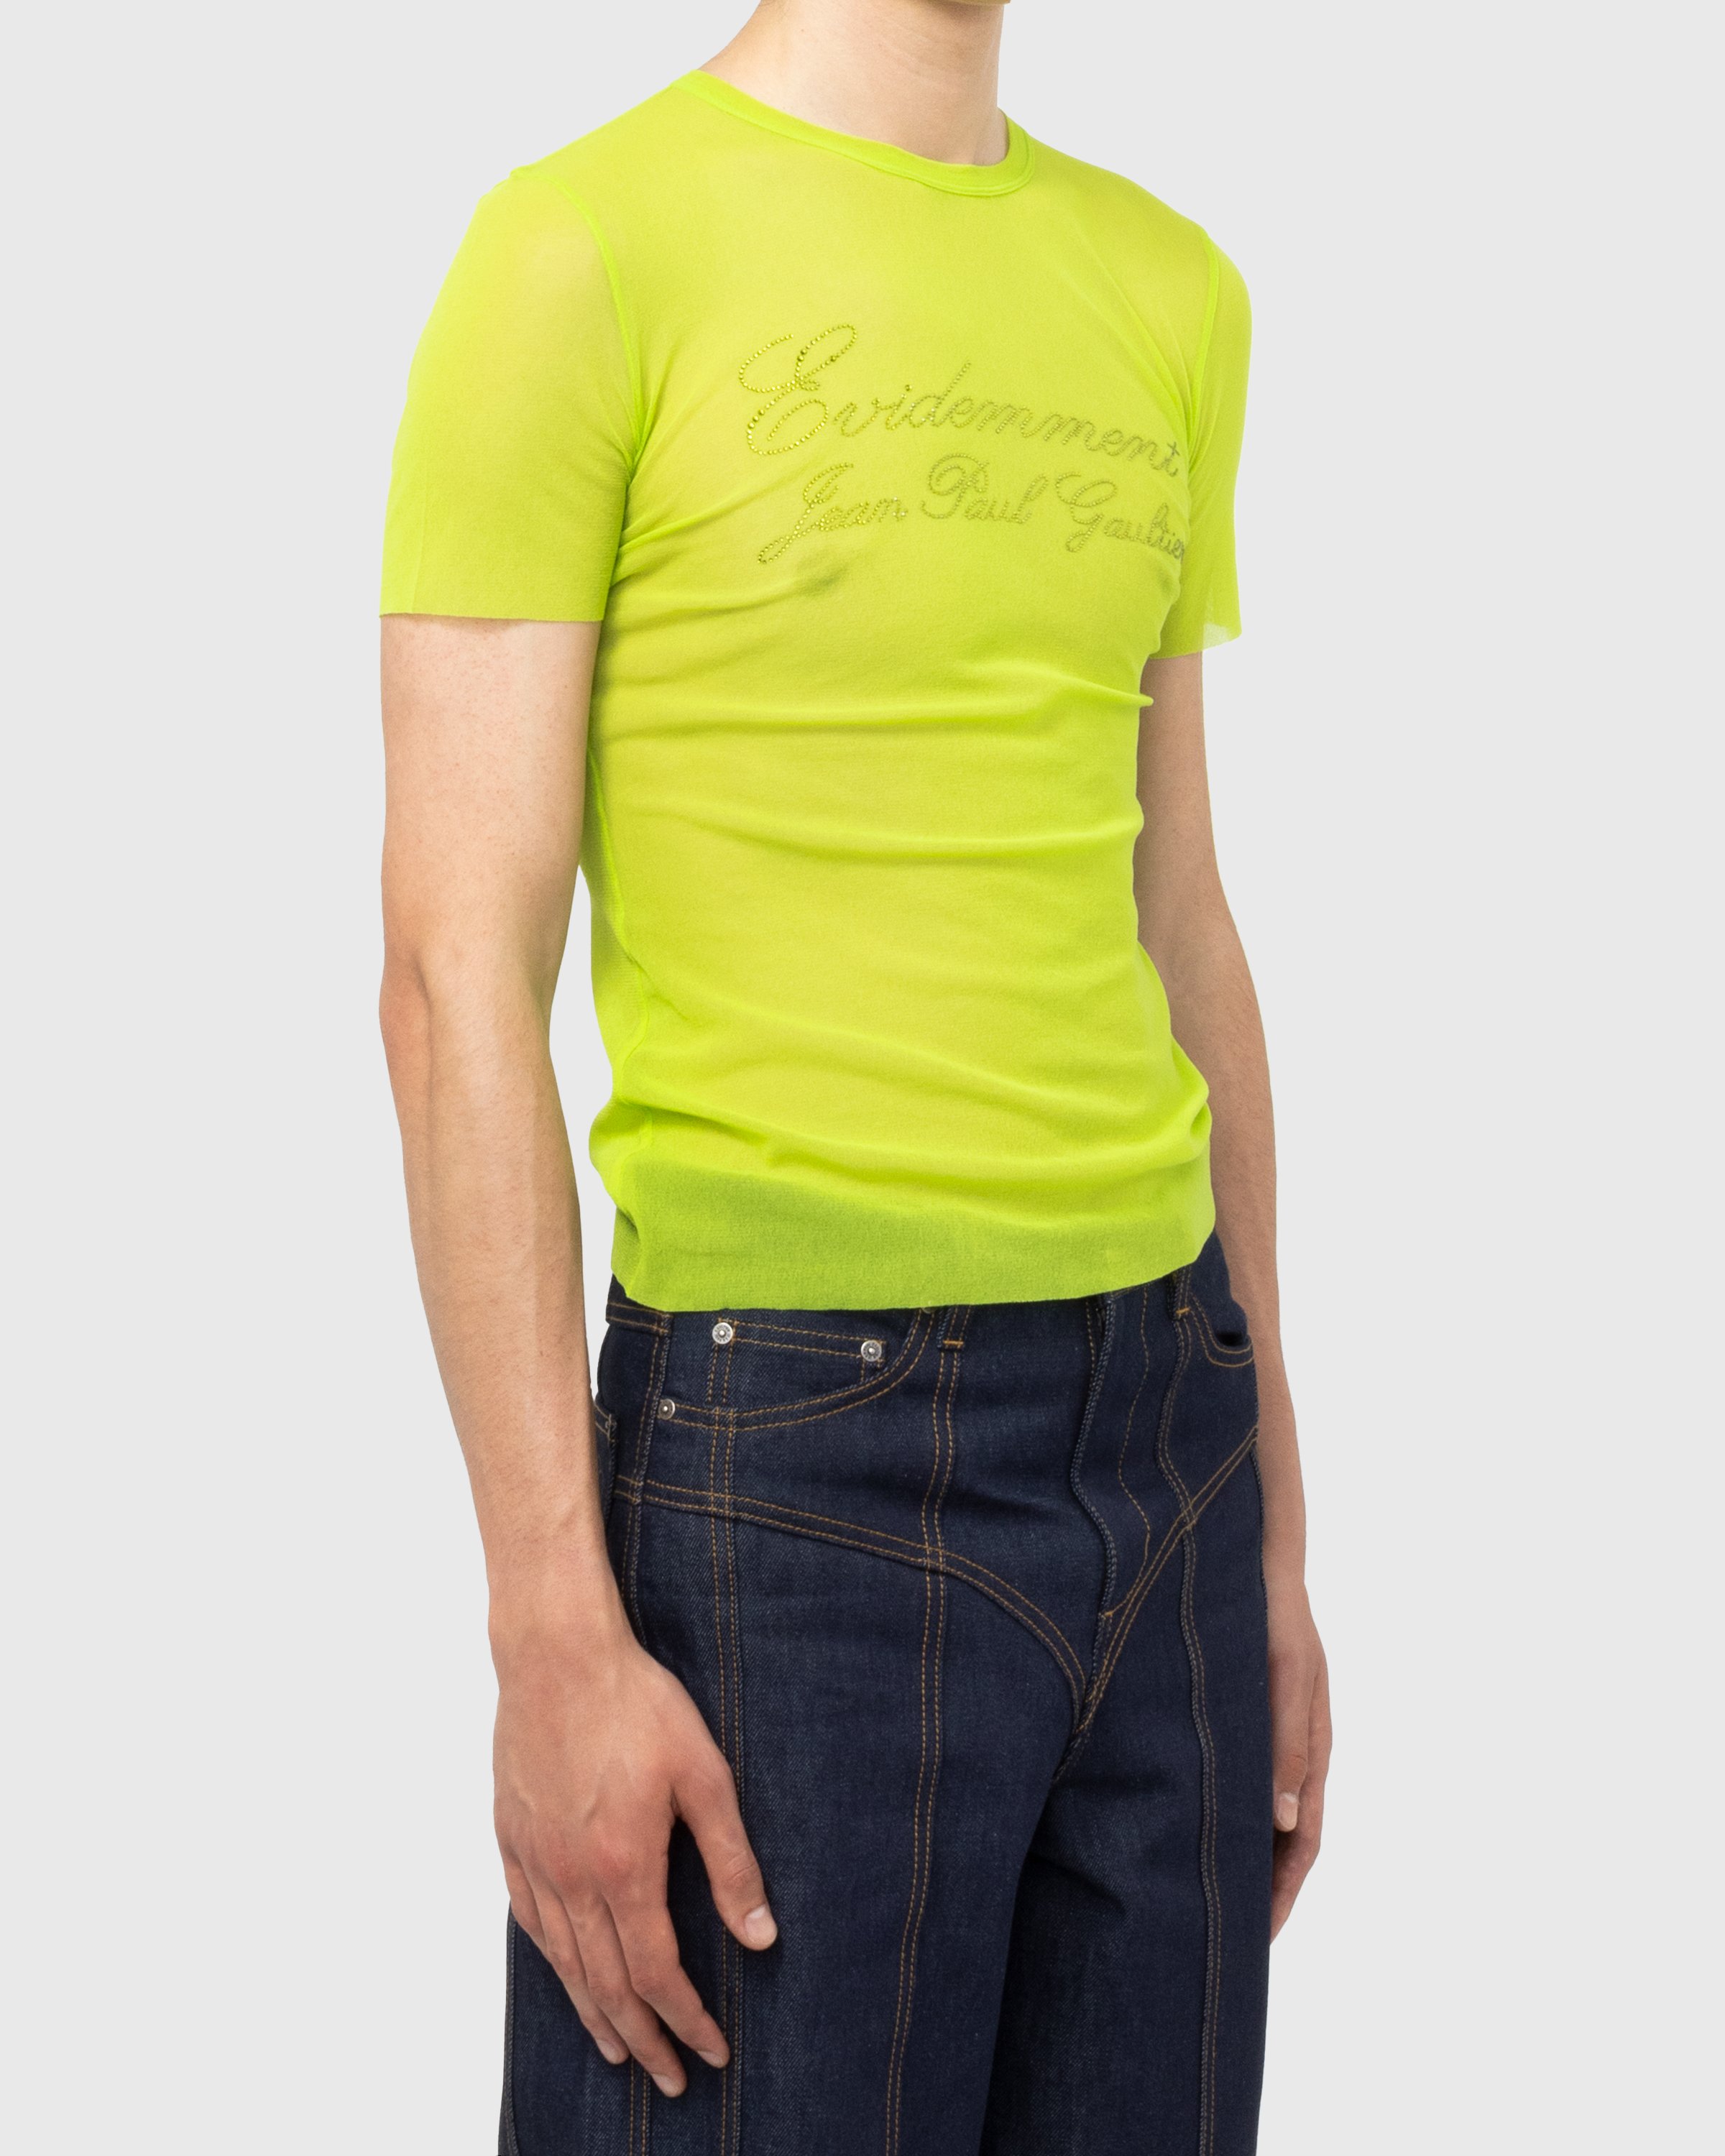 Jean Paul Gaultier - Évidemment Tulle T-Shirt Lime Green - Clothing - Green - Image 5